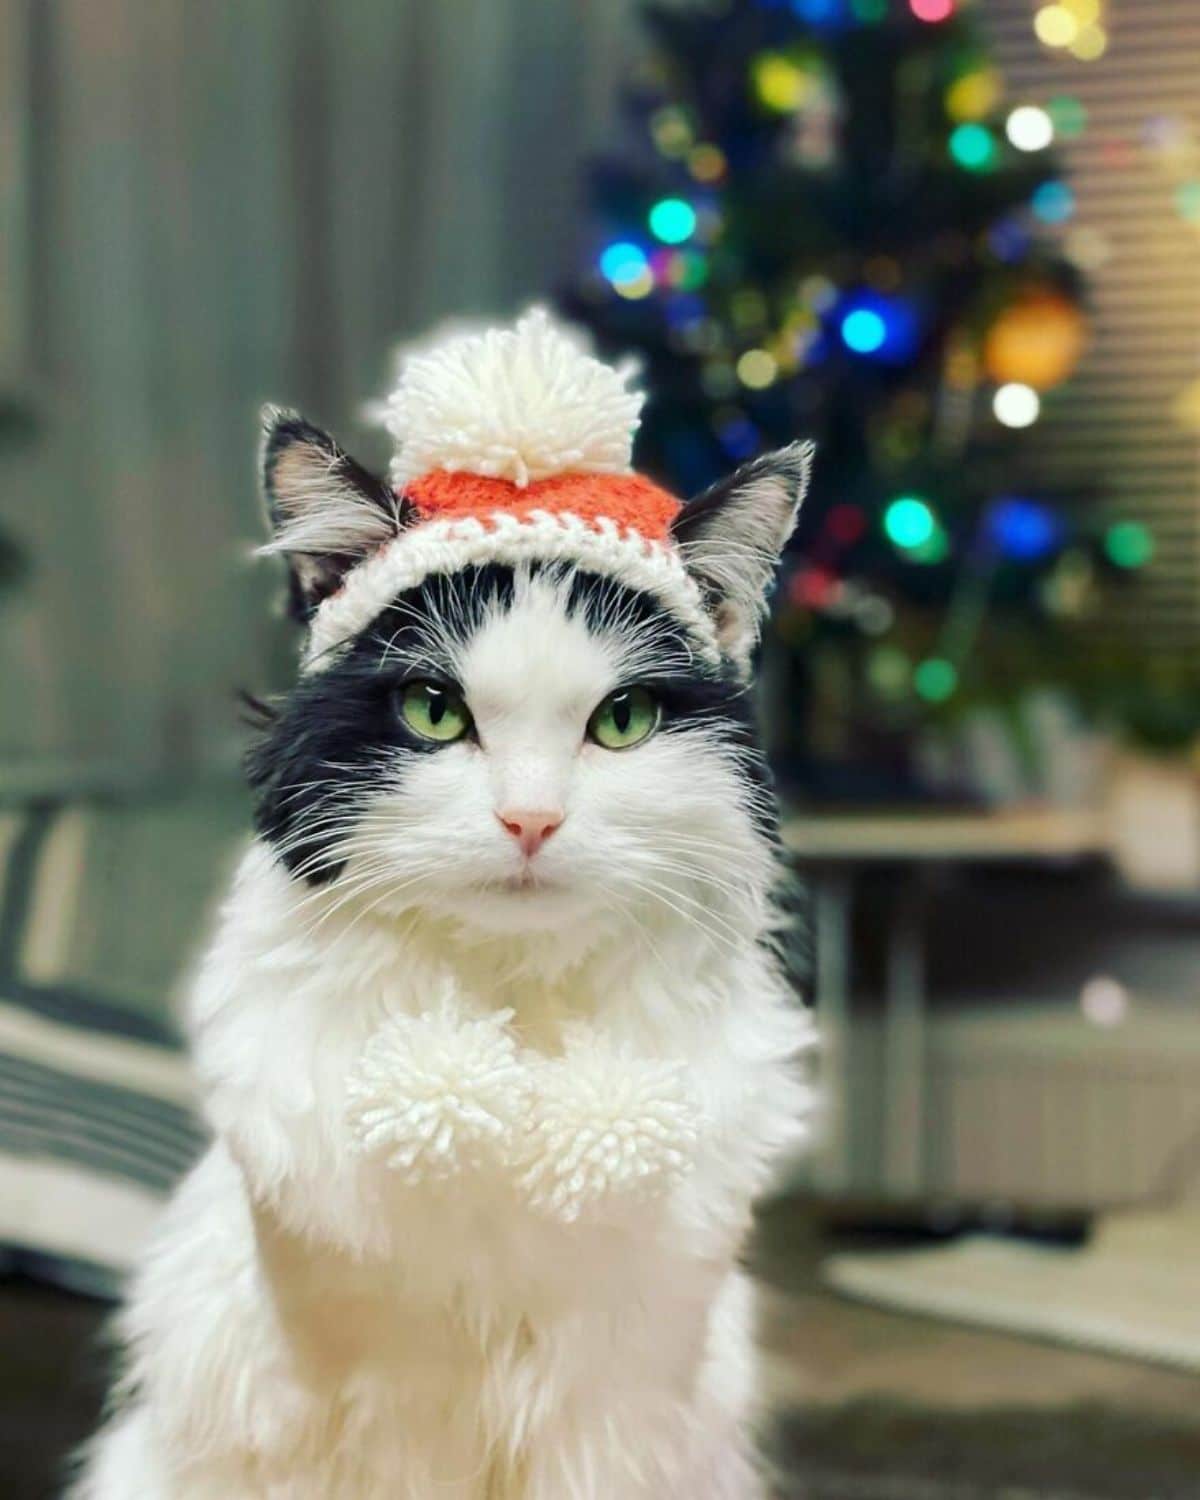 black and white fluffy cat wearing a white and orange beanie with pom poms